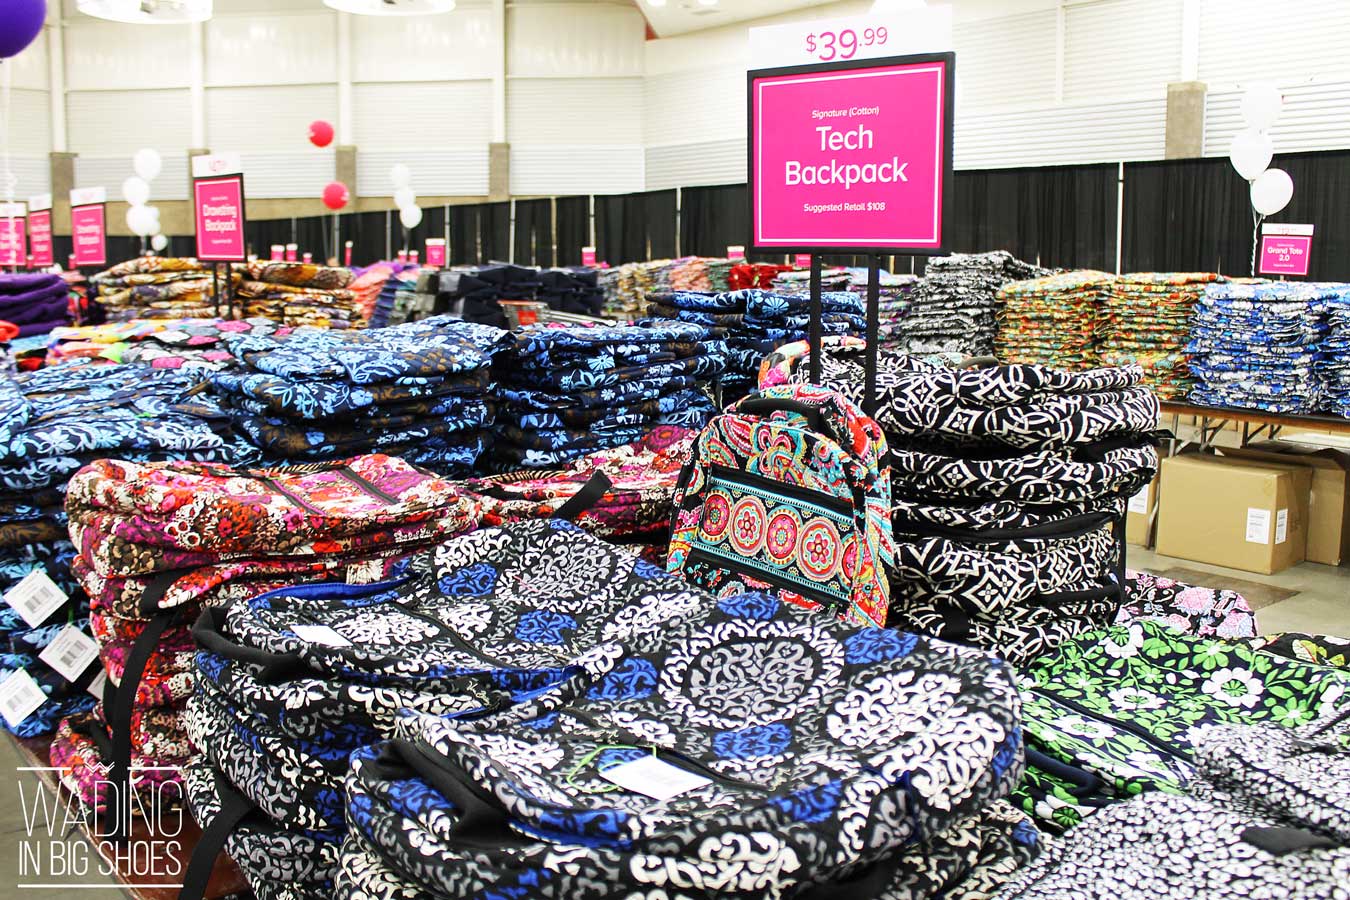 Girls’ Getaway Weekend: Inside Vera Bradley’s Massive Annual Outlet Sale (via Wading in Big Shoes) | The Vera Bradley annual outlet sale in Fort Wayne, Indiana features 100,000 square feet of authentic merchandise for 40-60 percent off. Thousands of people visit every year--find dates and learn how to register here!